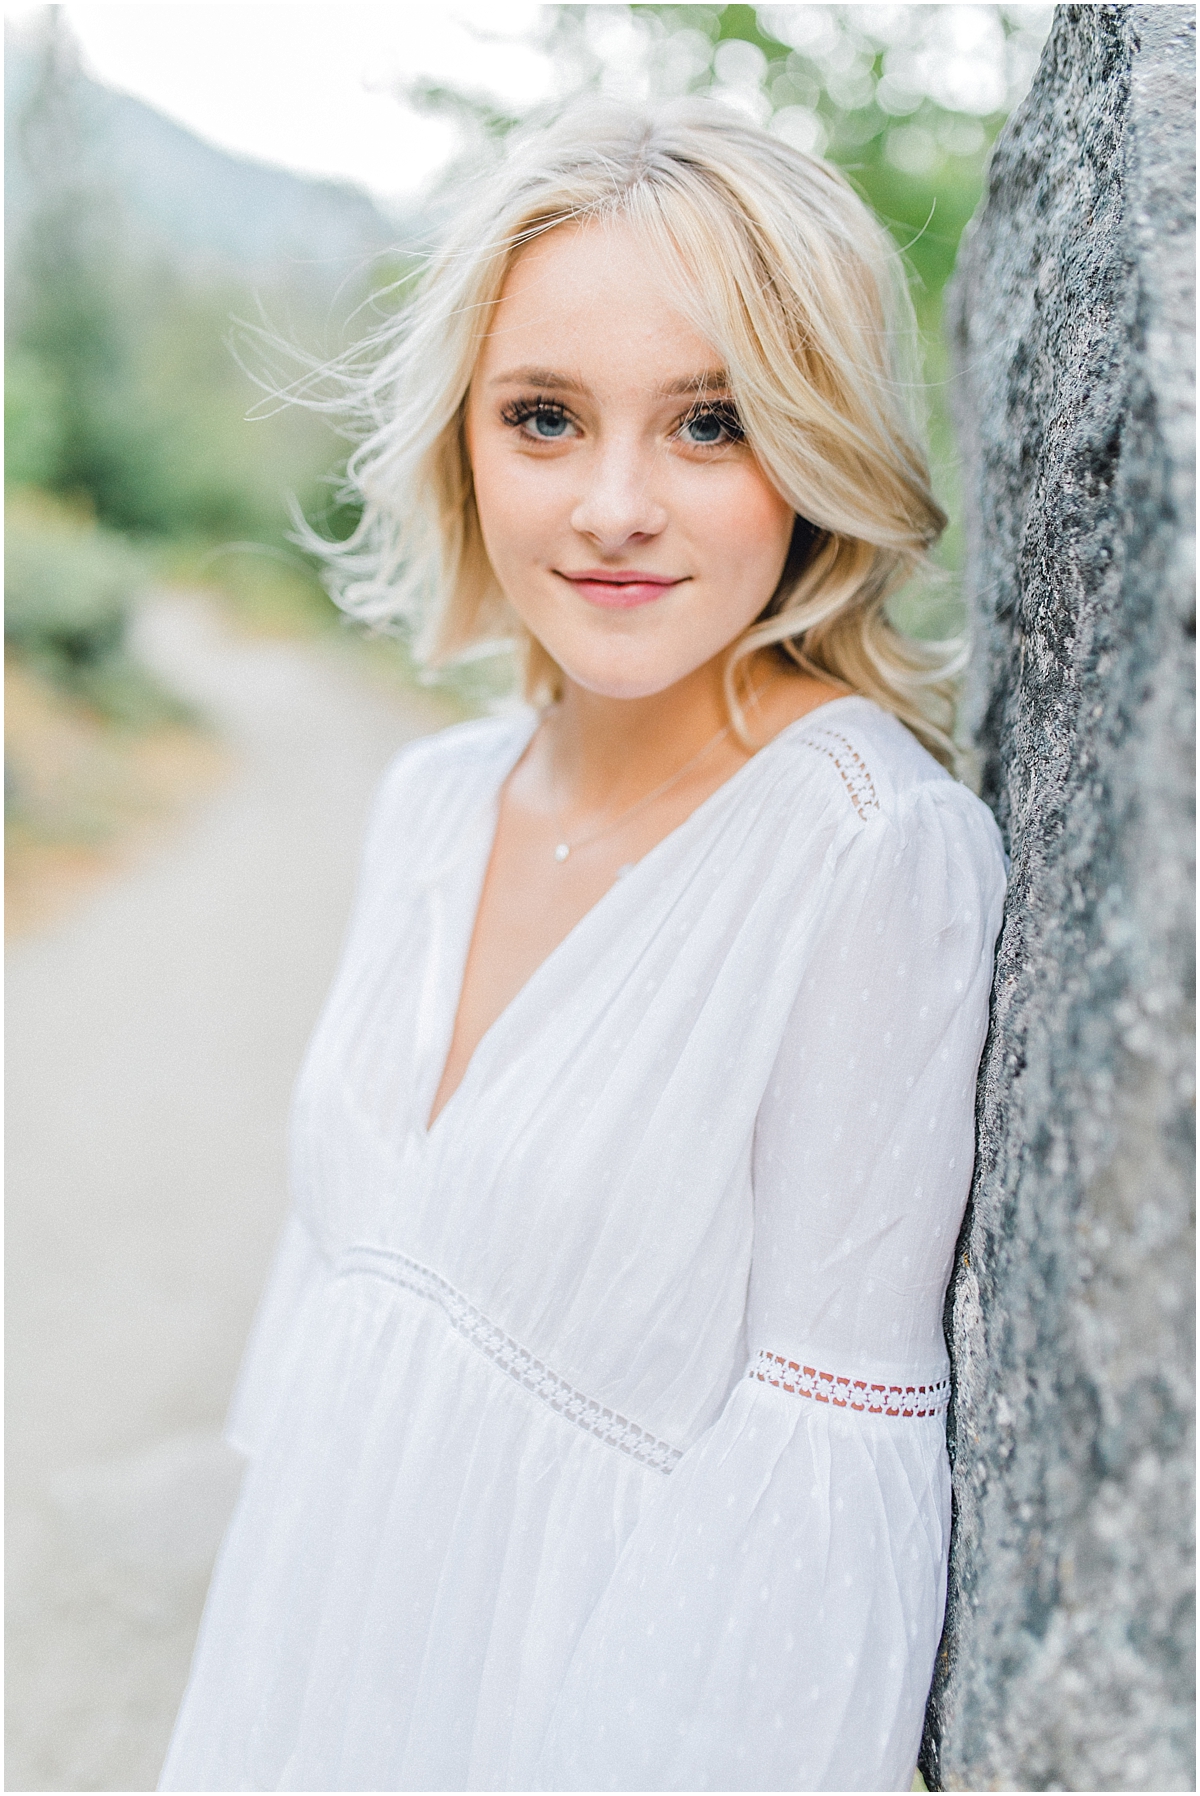 Emma Rose Company | Pacific Northwest Senior Portrait Photographer | Light and Airy Styled Senior Portraits | What to Wear to Senior Pictures | Kindred Presets | Seattle, Wenatchee and Portland Wedding and Portrait Photographer | Emma Rose23.jpg